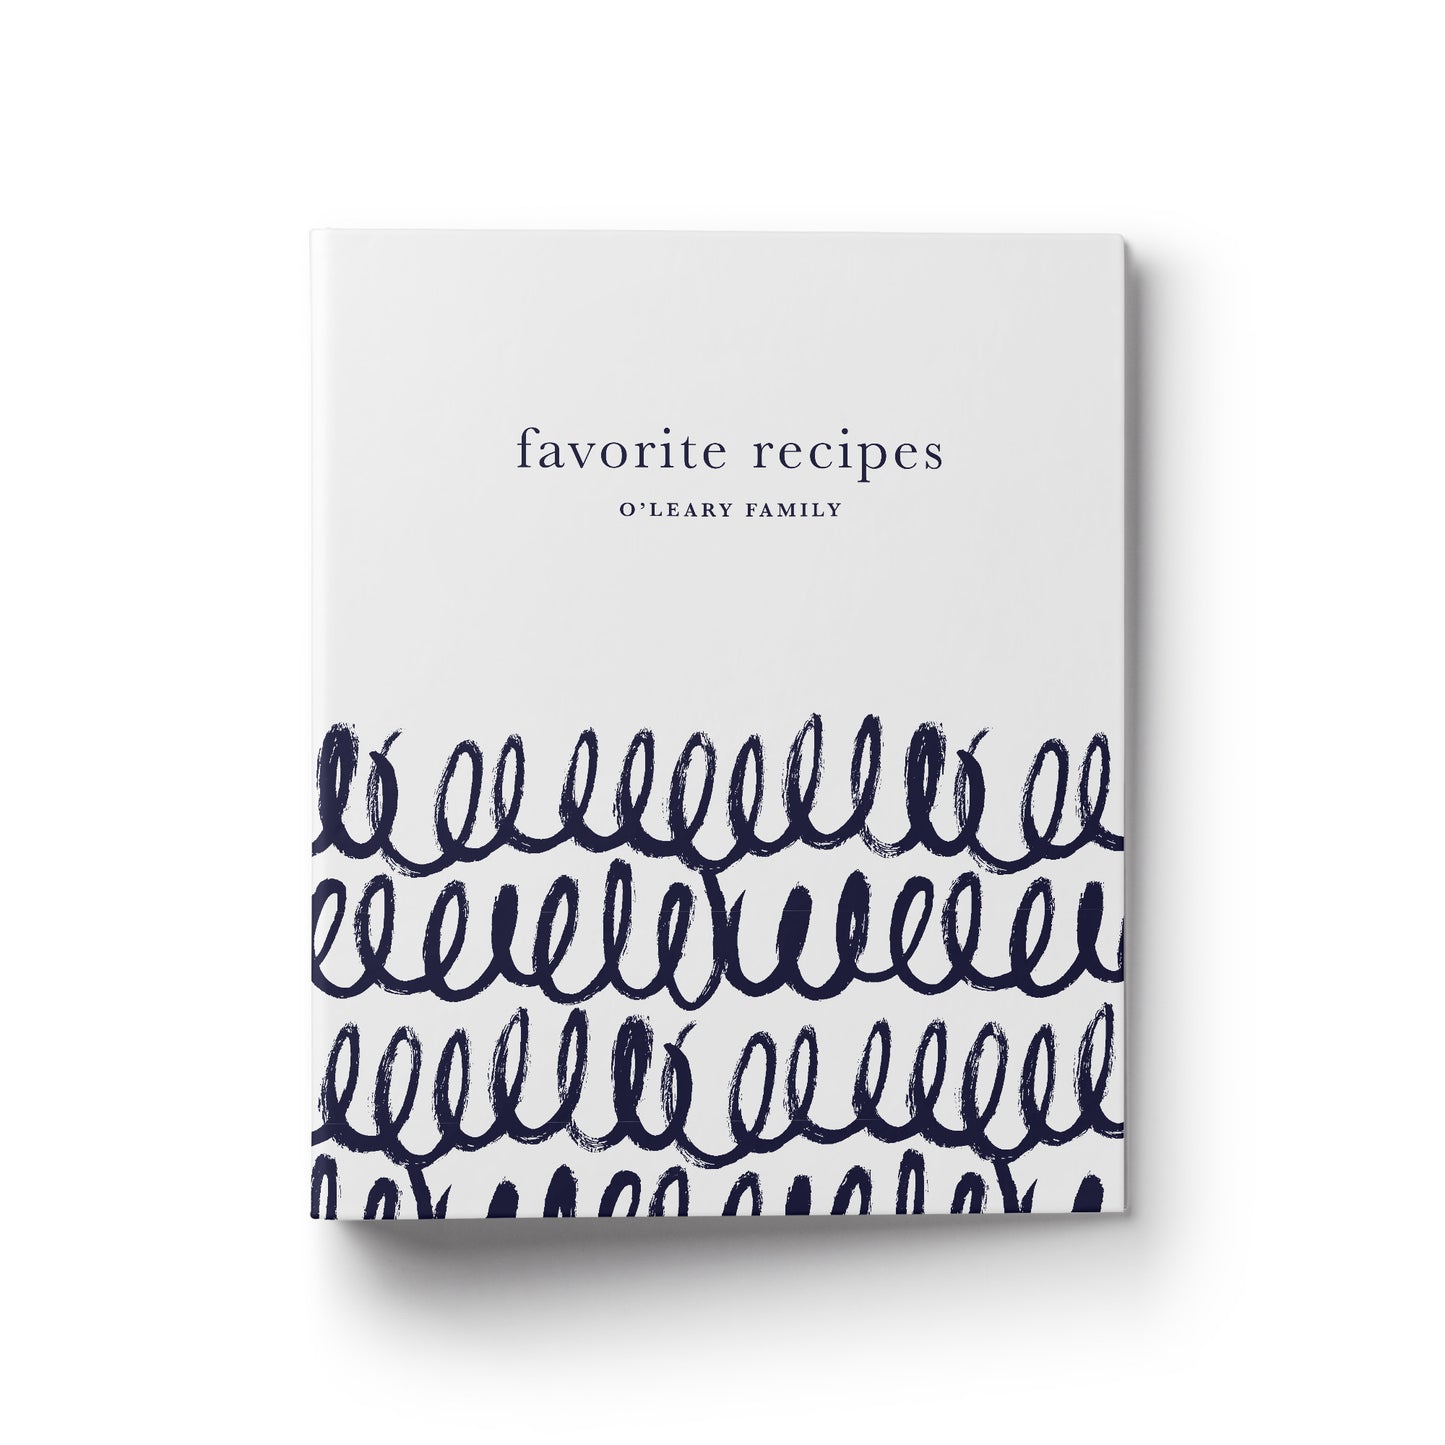 A fun squiggle loop design custom recipe binder makes the perfect gift for any occasion